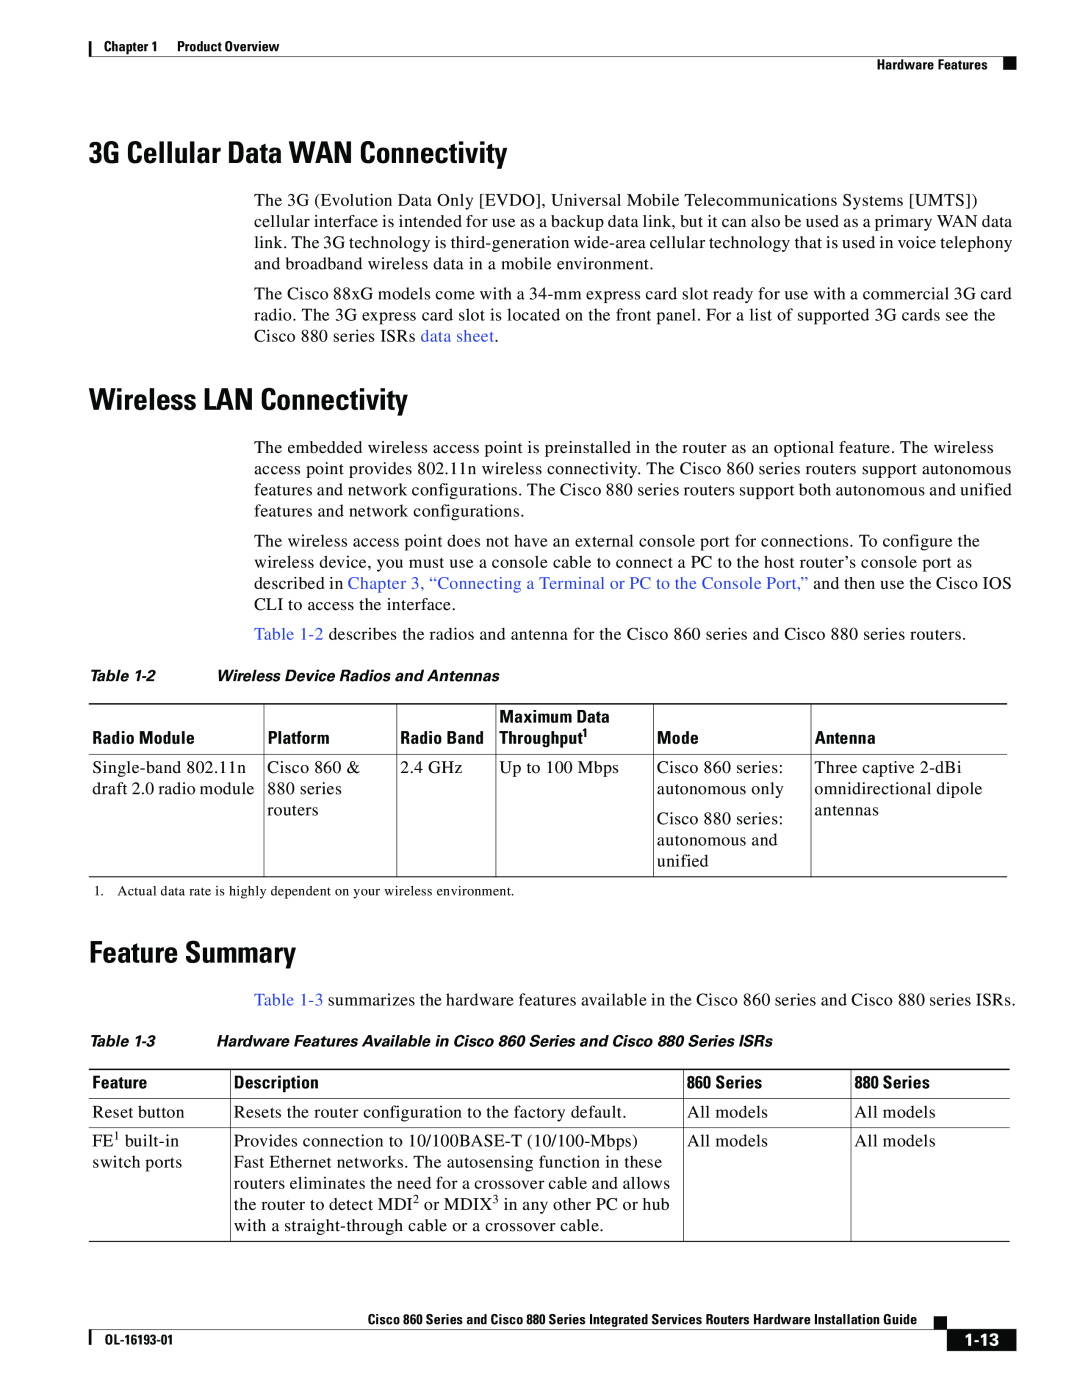 Cisco Systems 861W, HIG880 3G Cellular Data WAN Connectivity, Wireless LAN Connectivity, Feature Summary, 1-13, Radio Band 